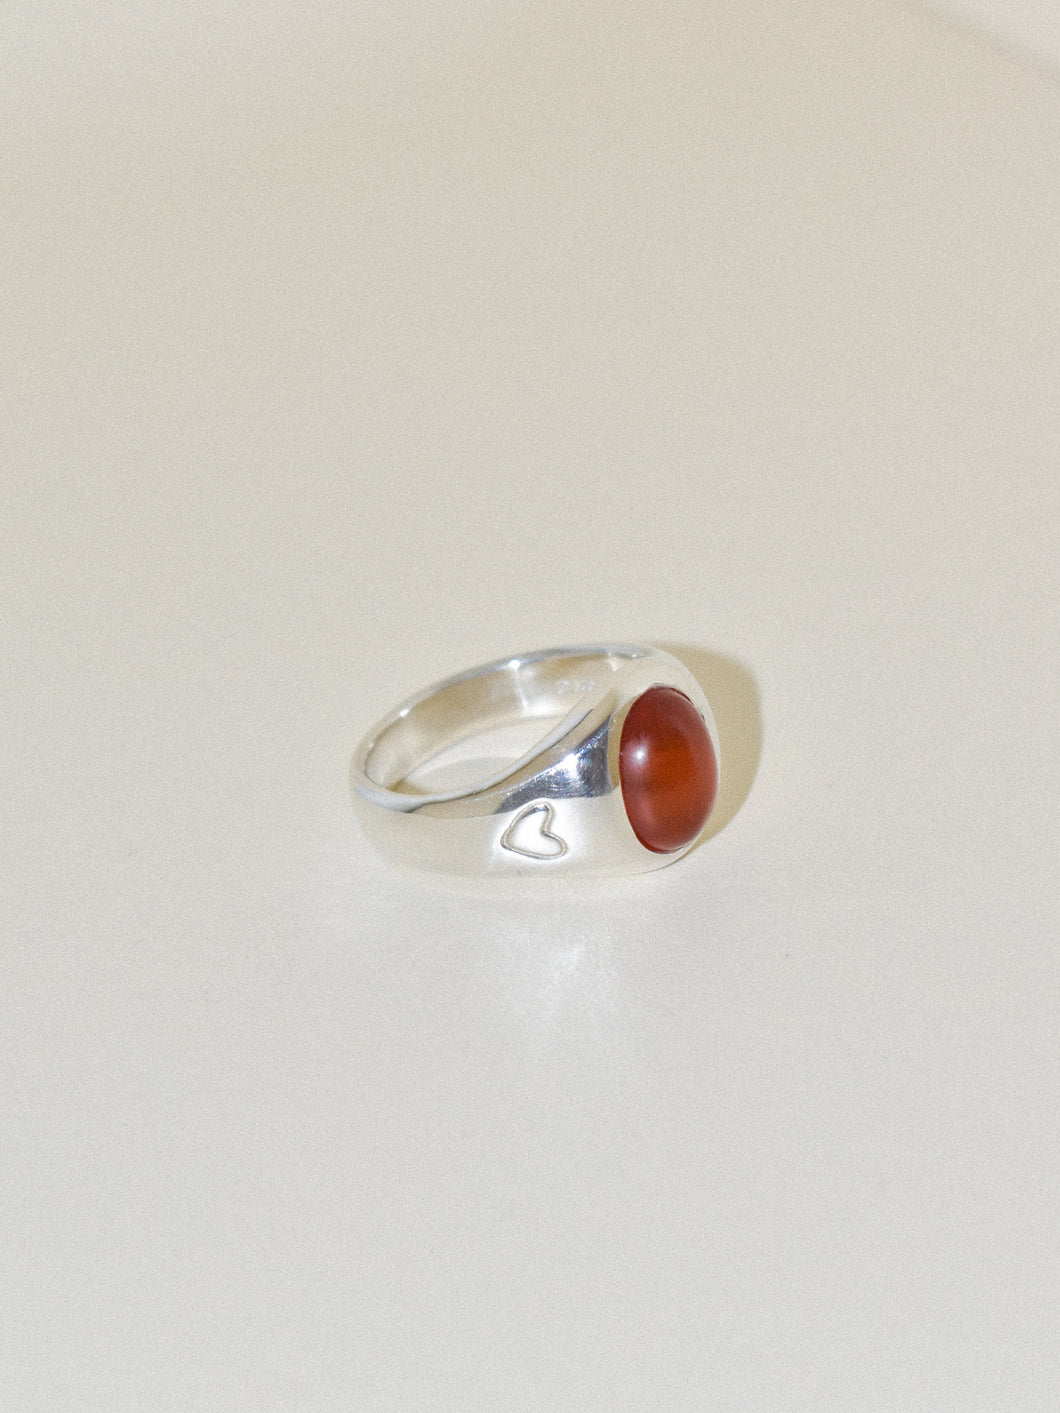 Limited Edition - Heart Ring - Carnelian - Size O